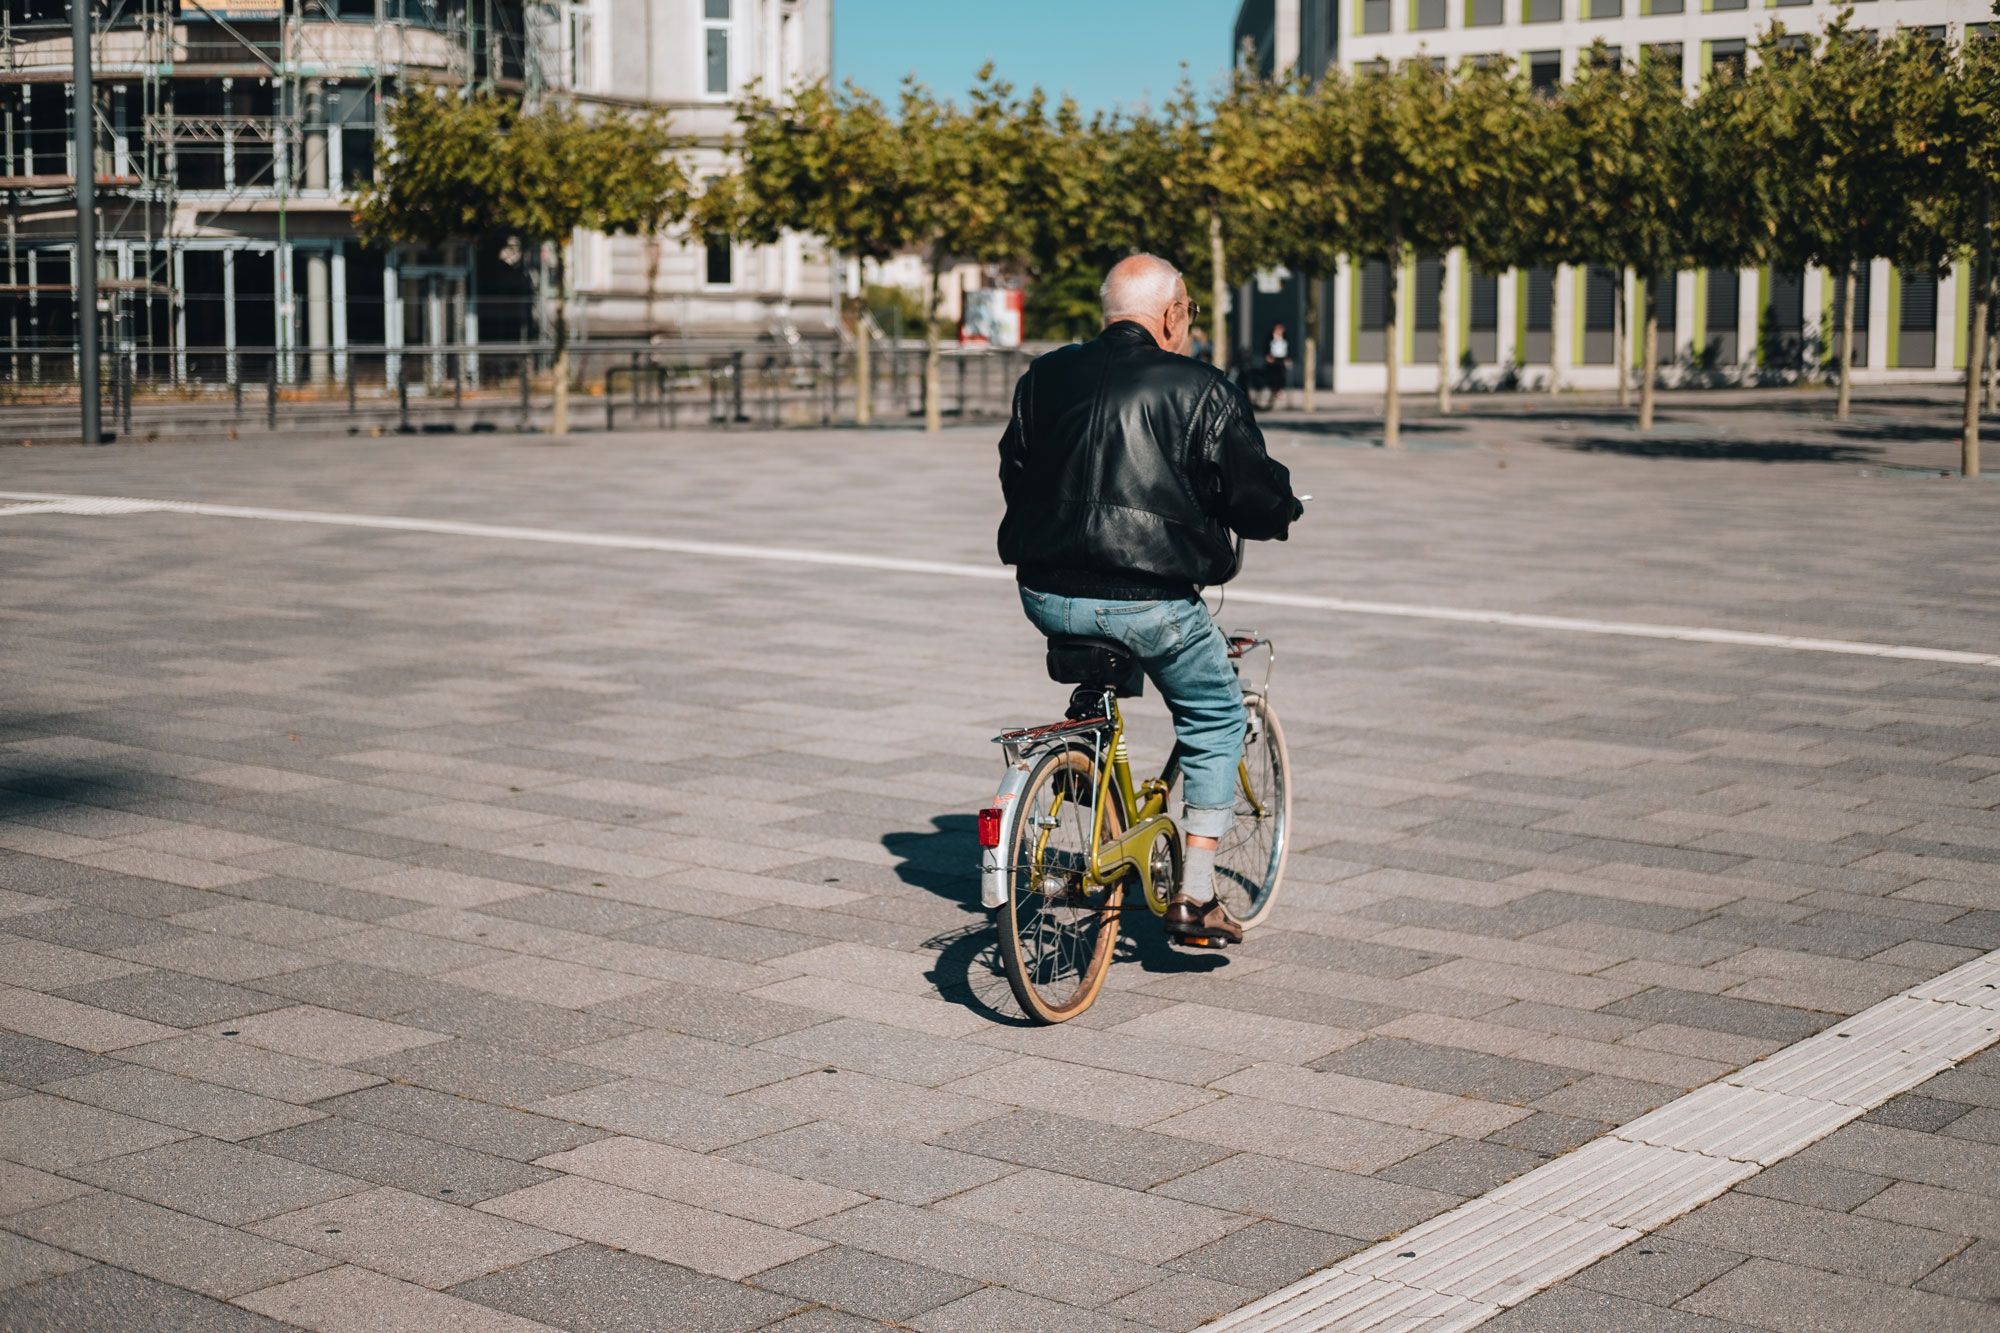 An elderly man on a yellow bicycle rides an asphalt square.